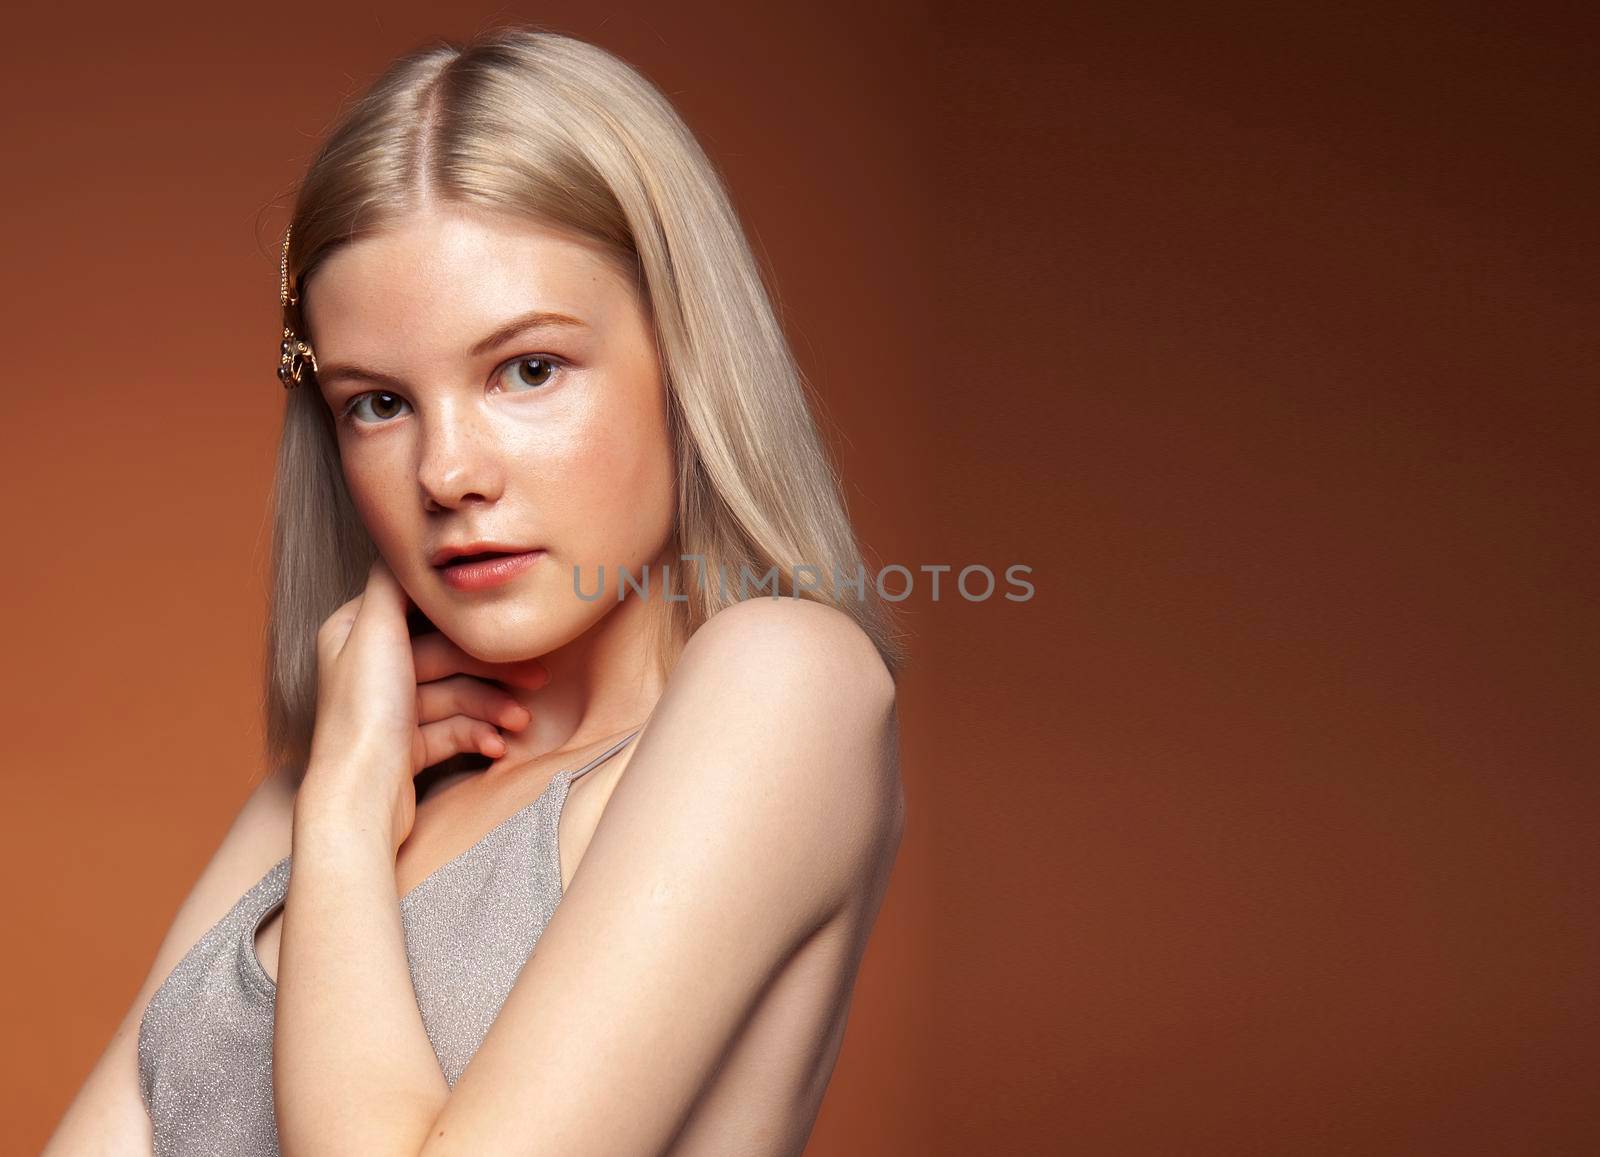 young pretty girl with blond hair posing cheerful on brown background, lifestyle people concept close up